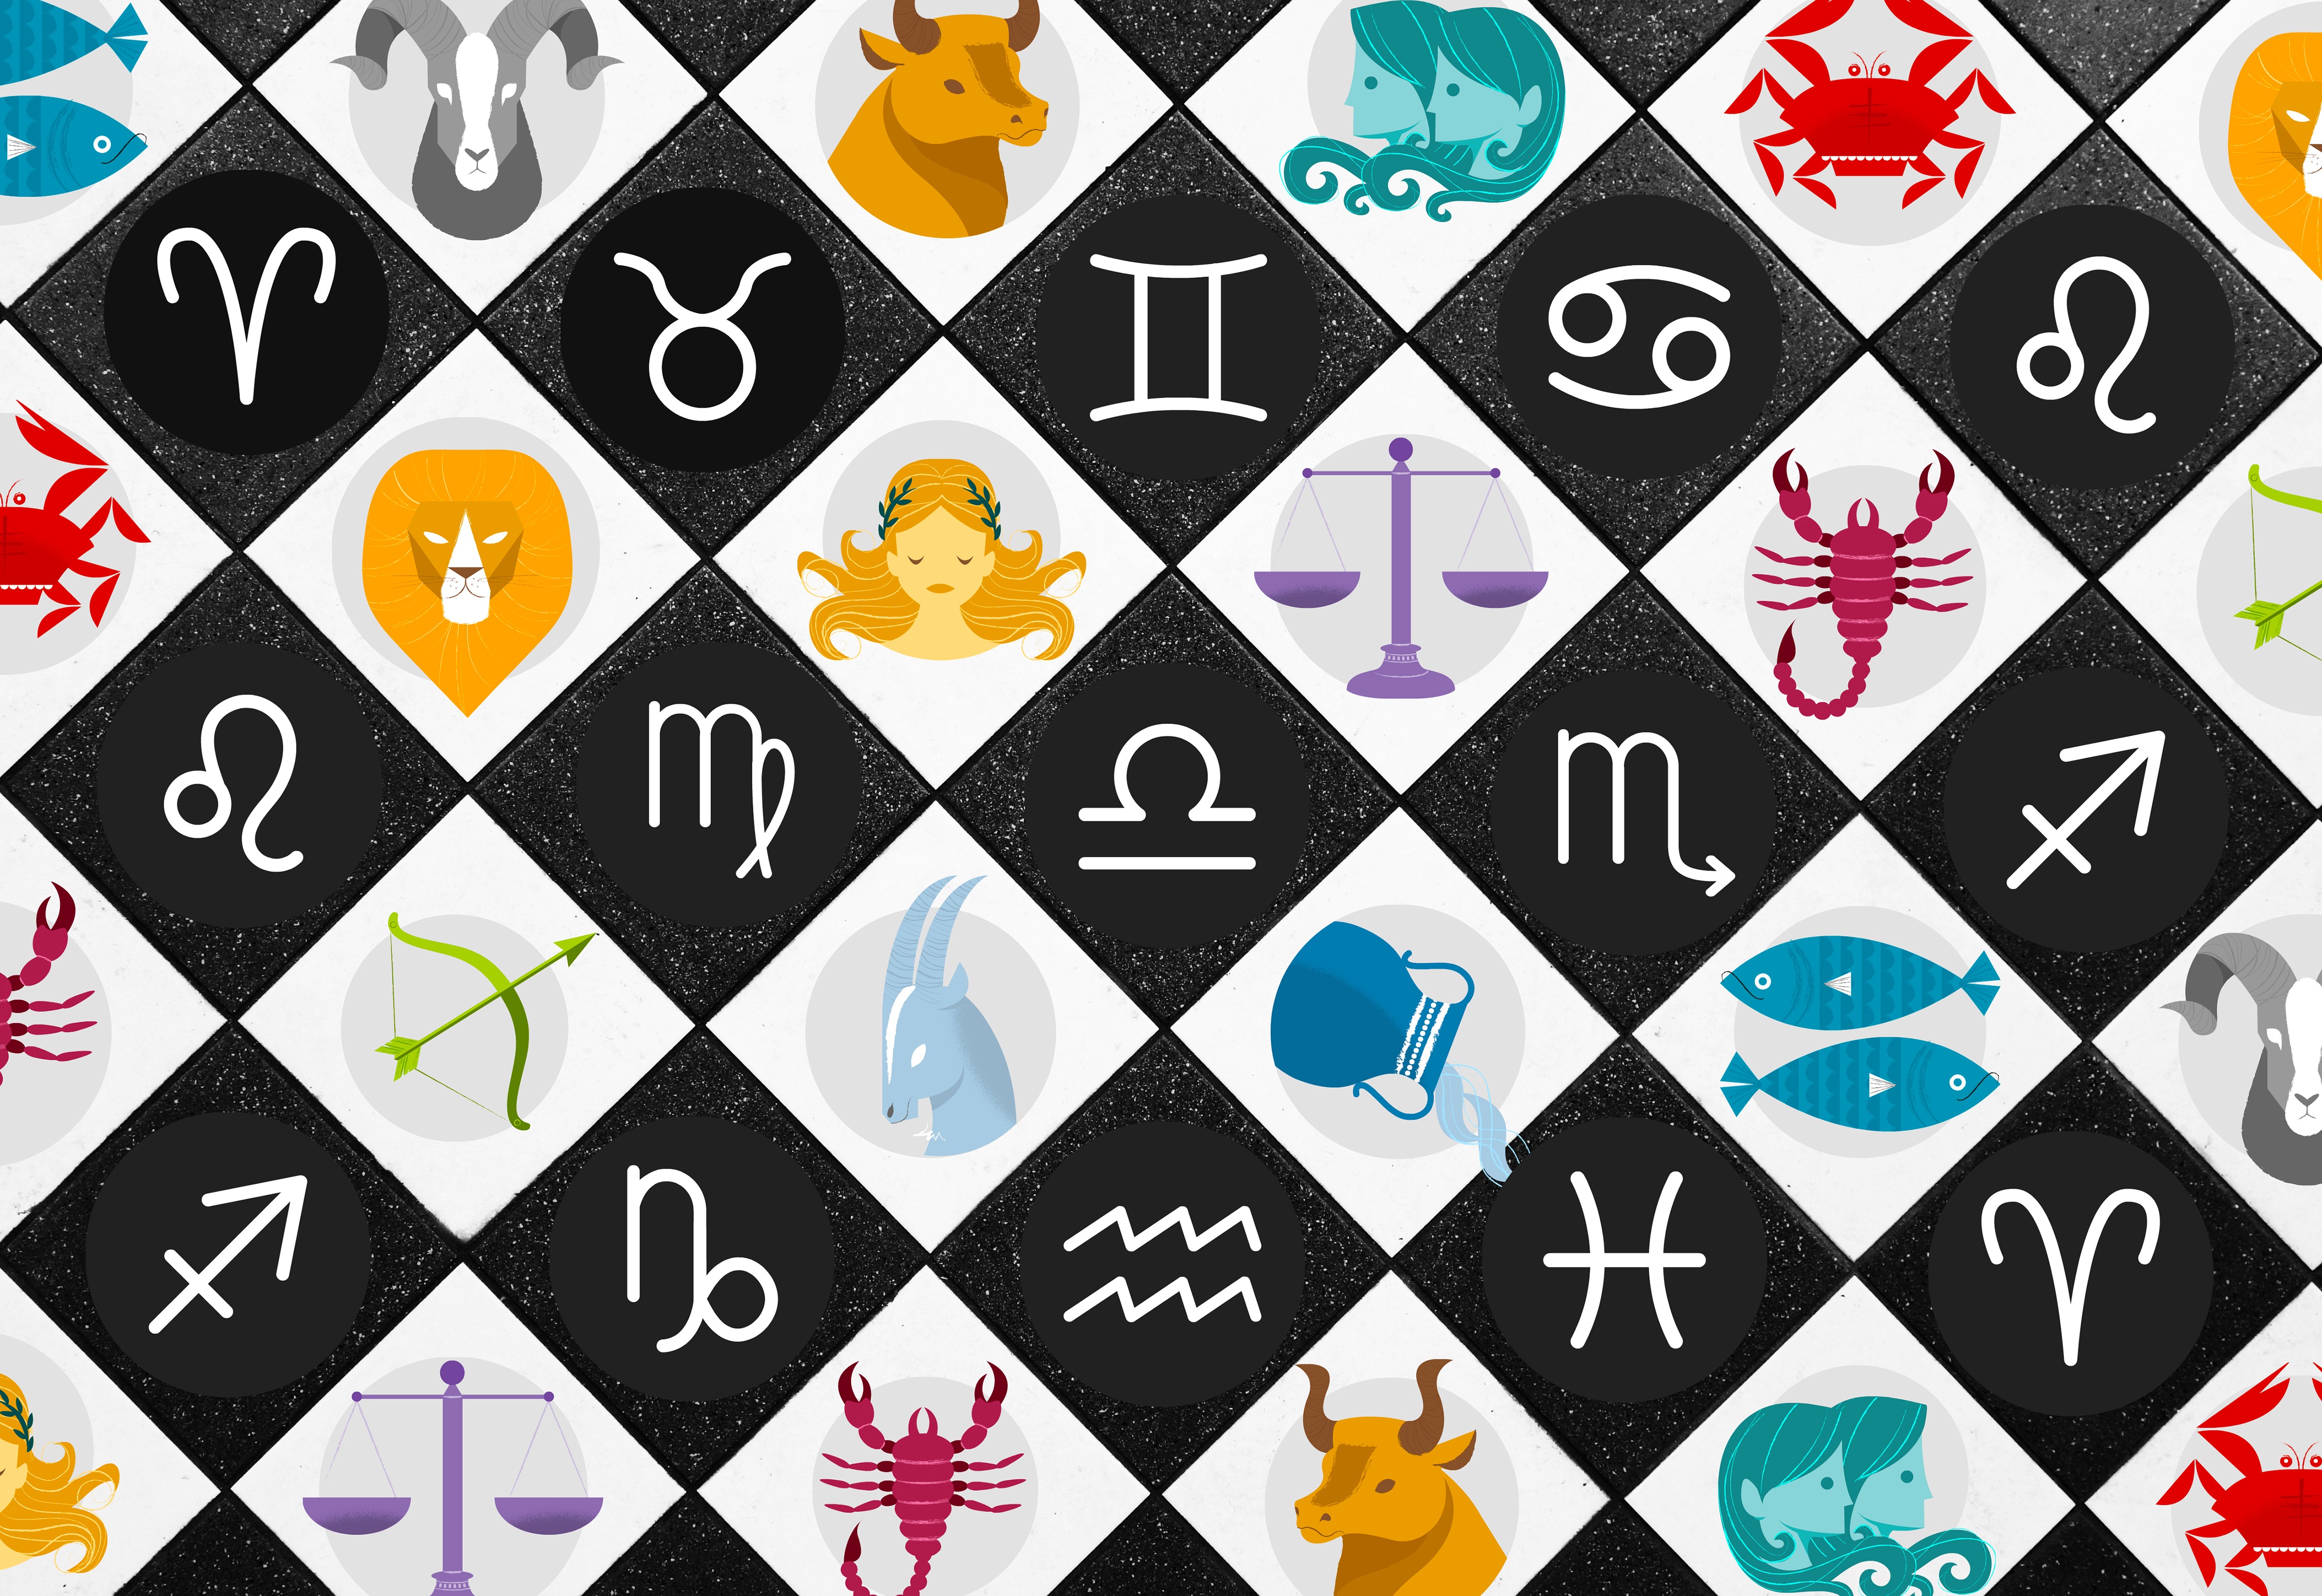 zodiac signs, astrology, art, miscellanea, miscellaneous, signs of the zodiac lock screen backgrounds